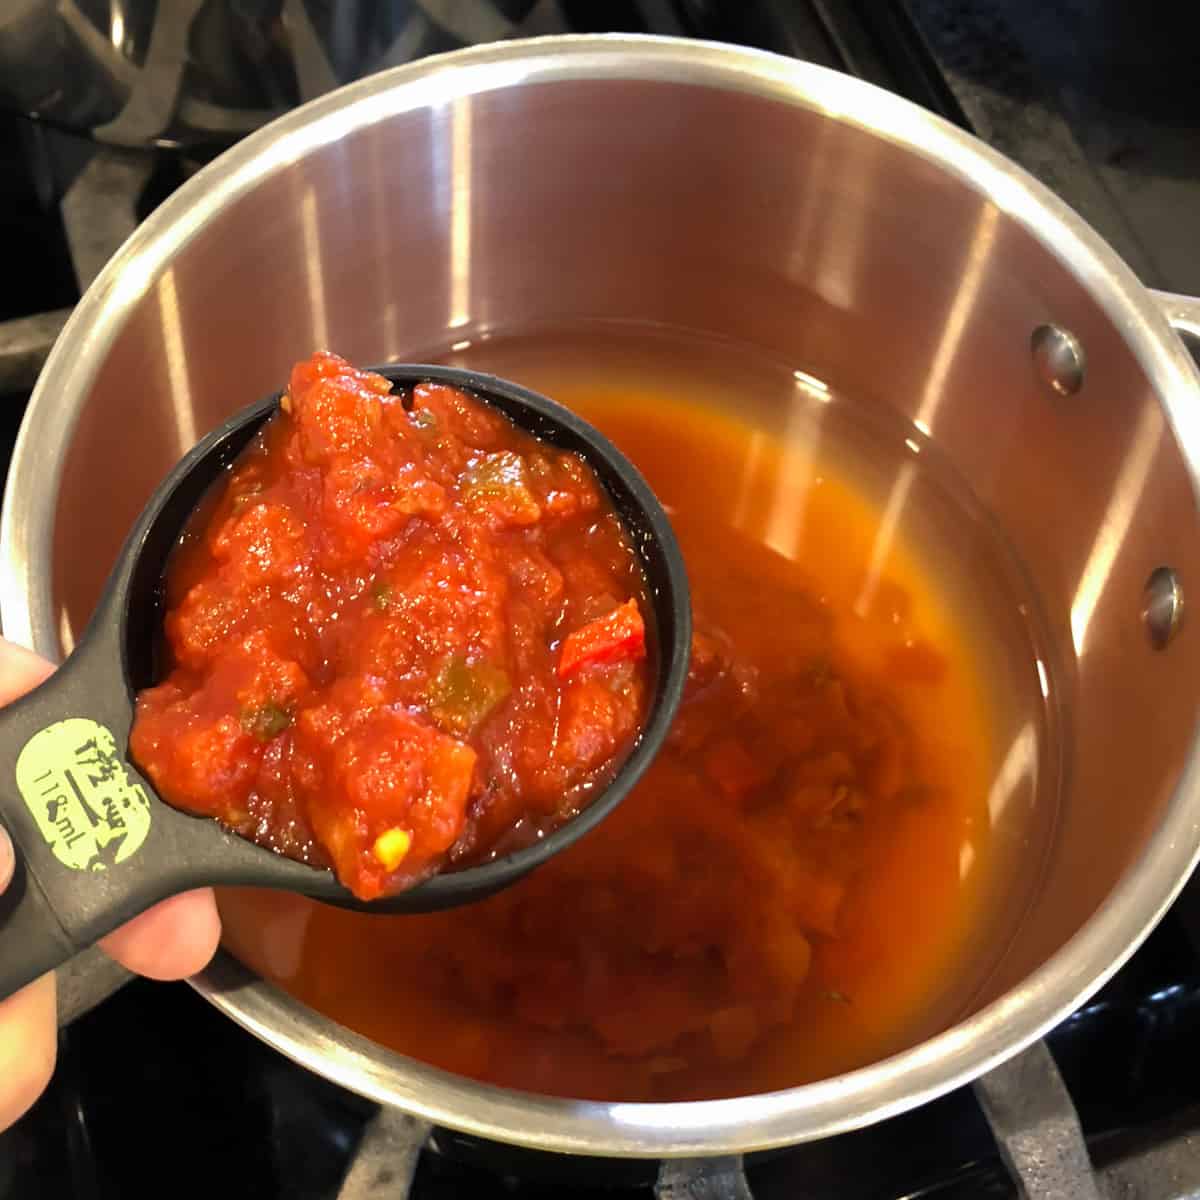 A measuring cup with salsa over a pot.